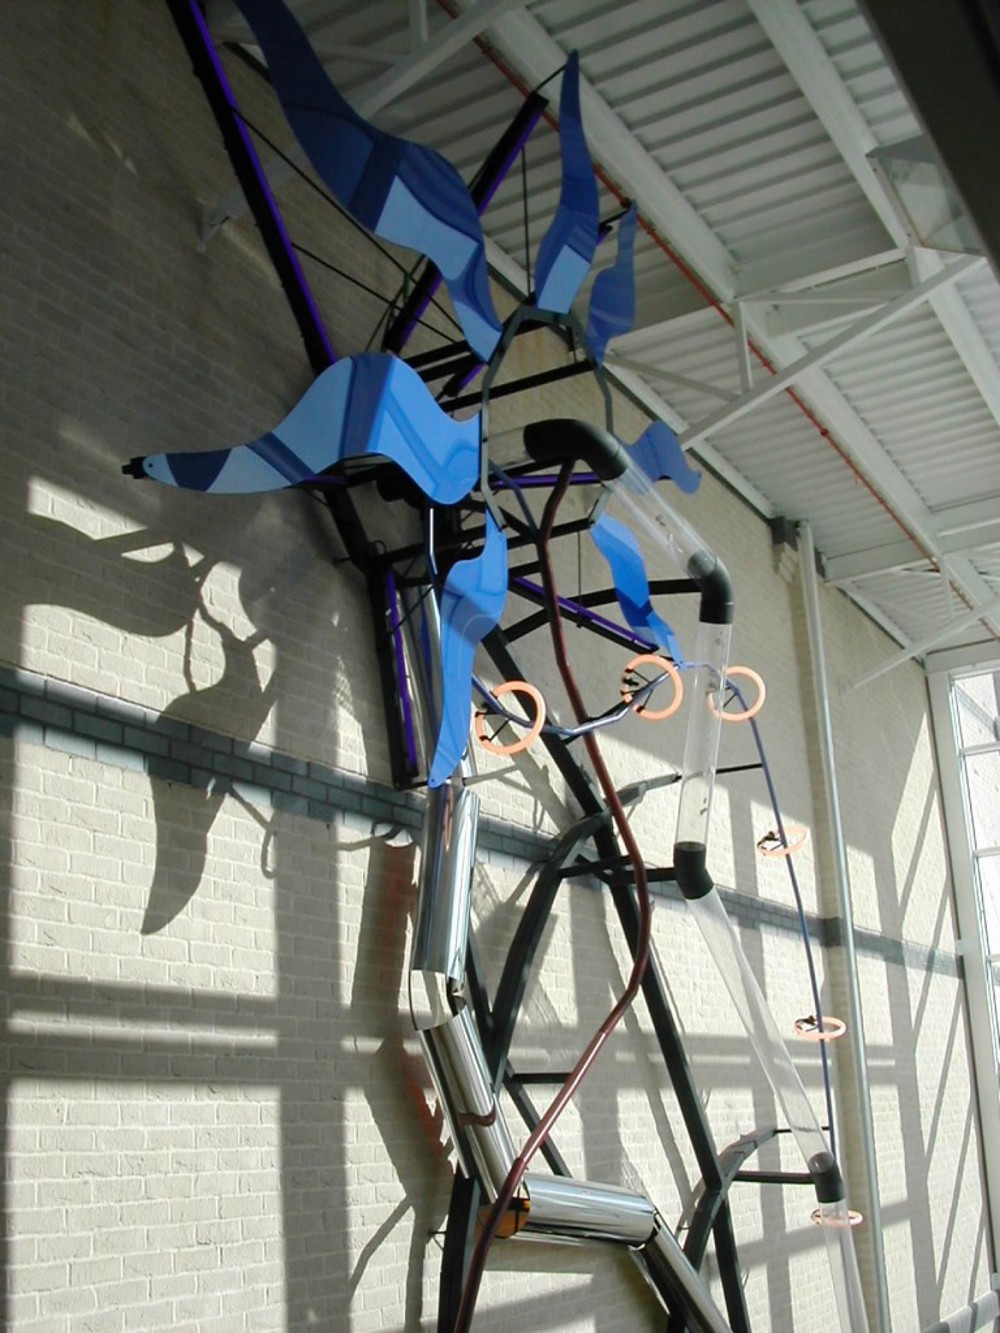 Sculpture of a large blue clock-like windmill on the side of a building